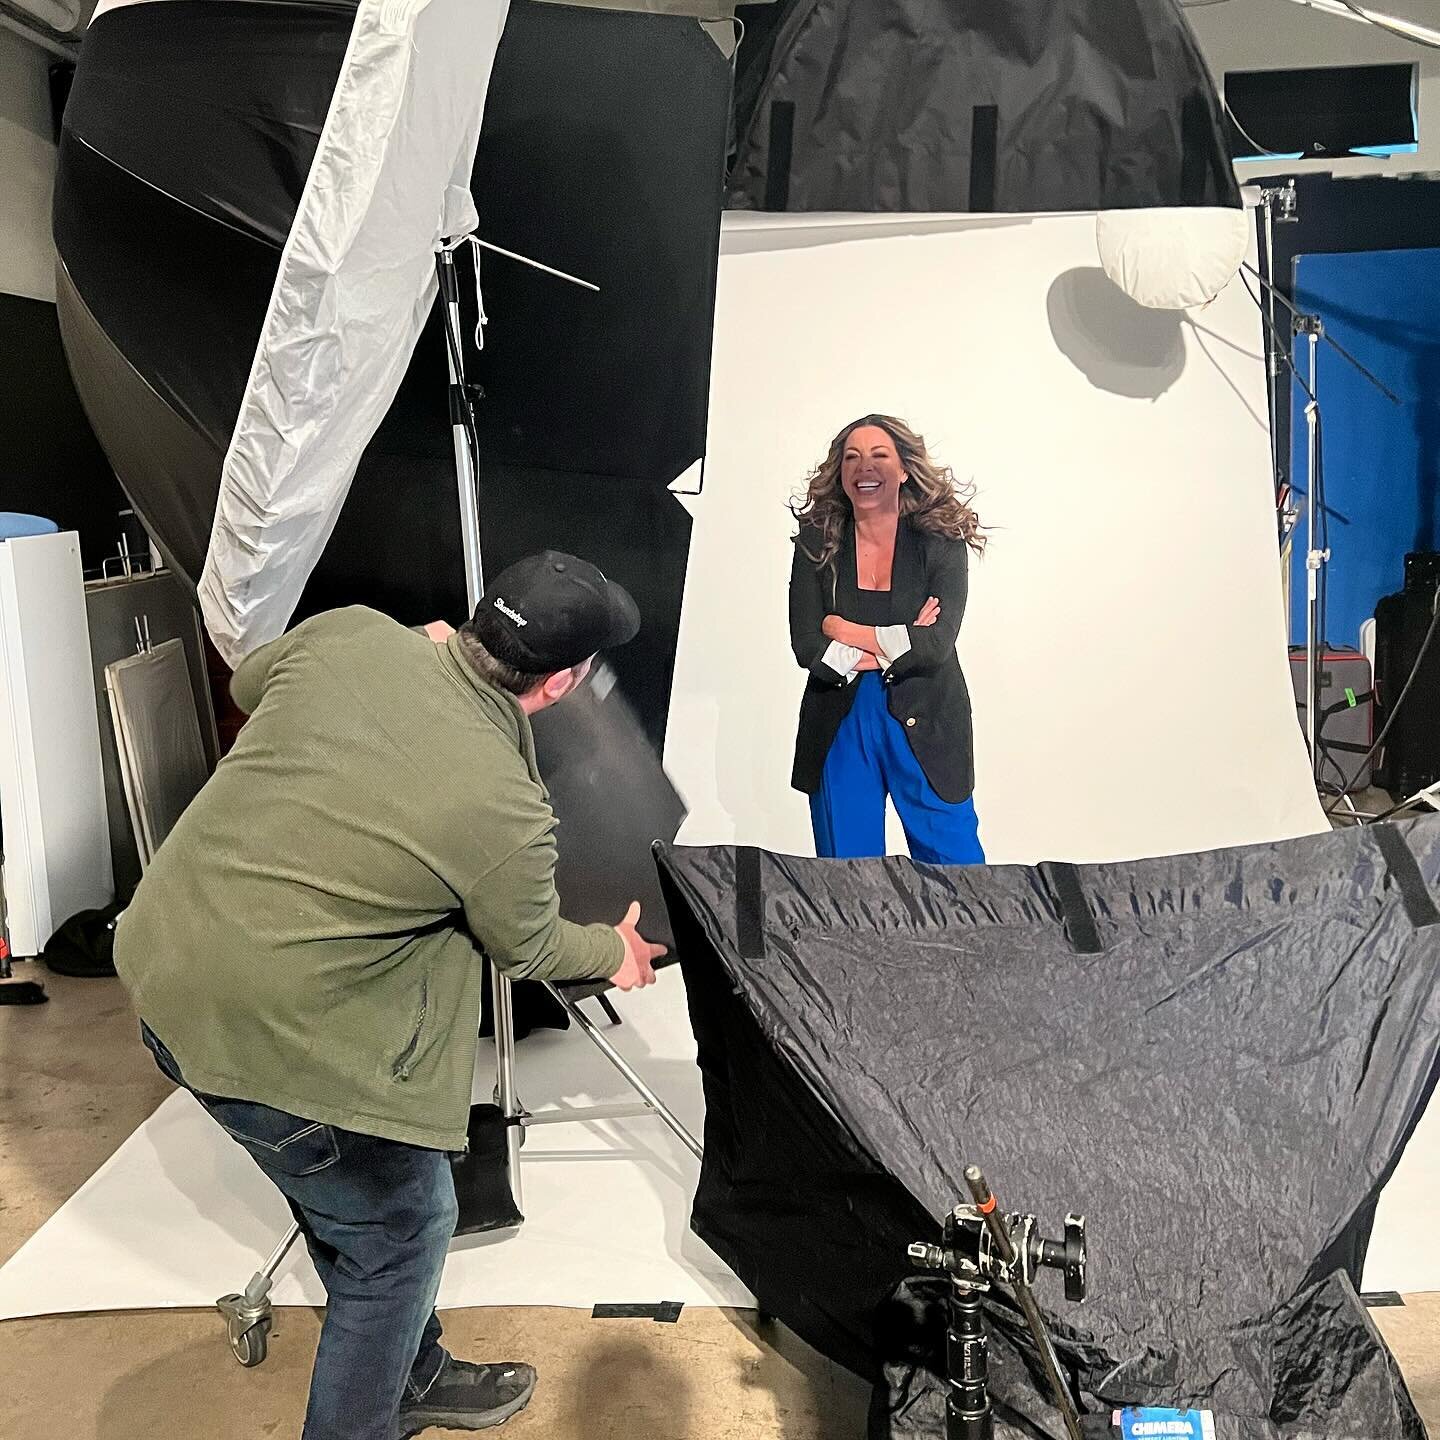 Saying yesterday was &ldquo;fun&rdquo; is an understatement. We absolutely love having Candace Carnahan in our studio. The energy and life she brings to every shoot we&rsquo;ve done together is unmatched.

Here are a couple BTS moments from yesterday